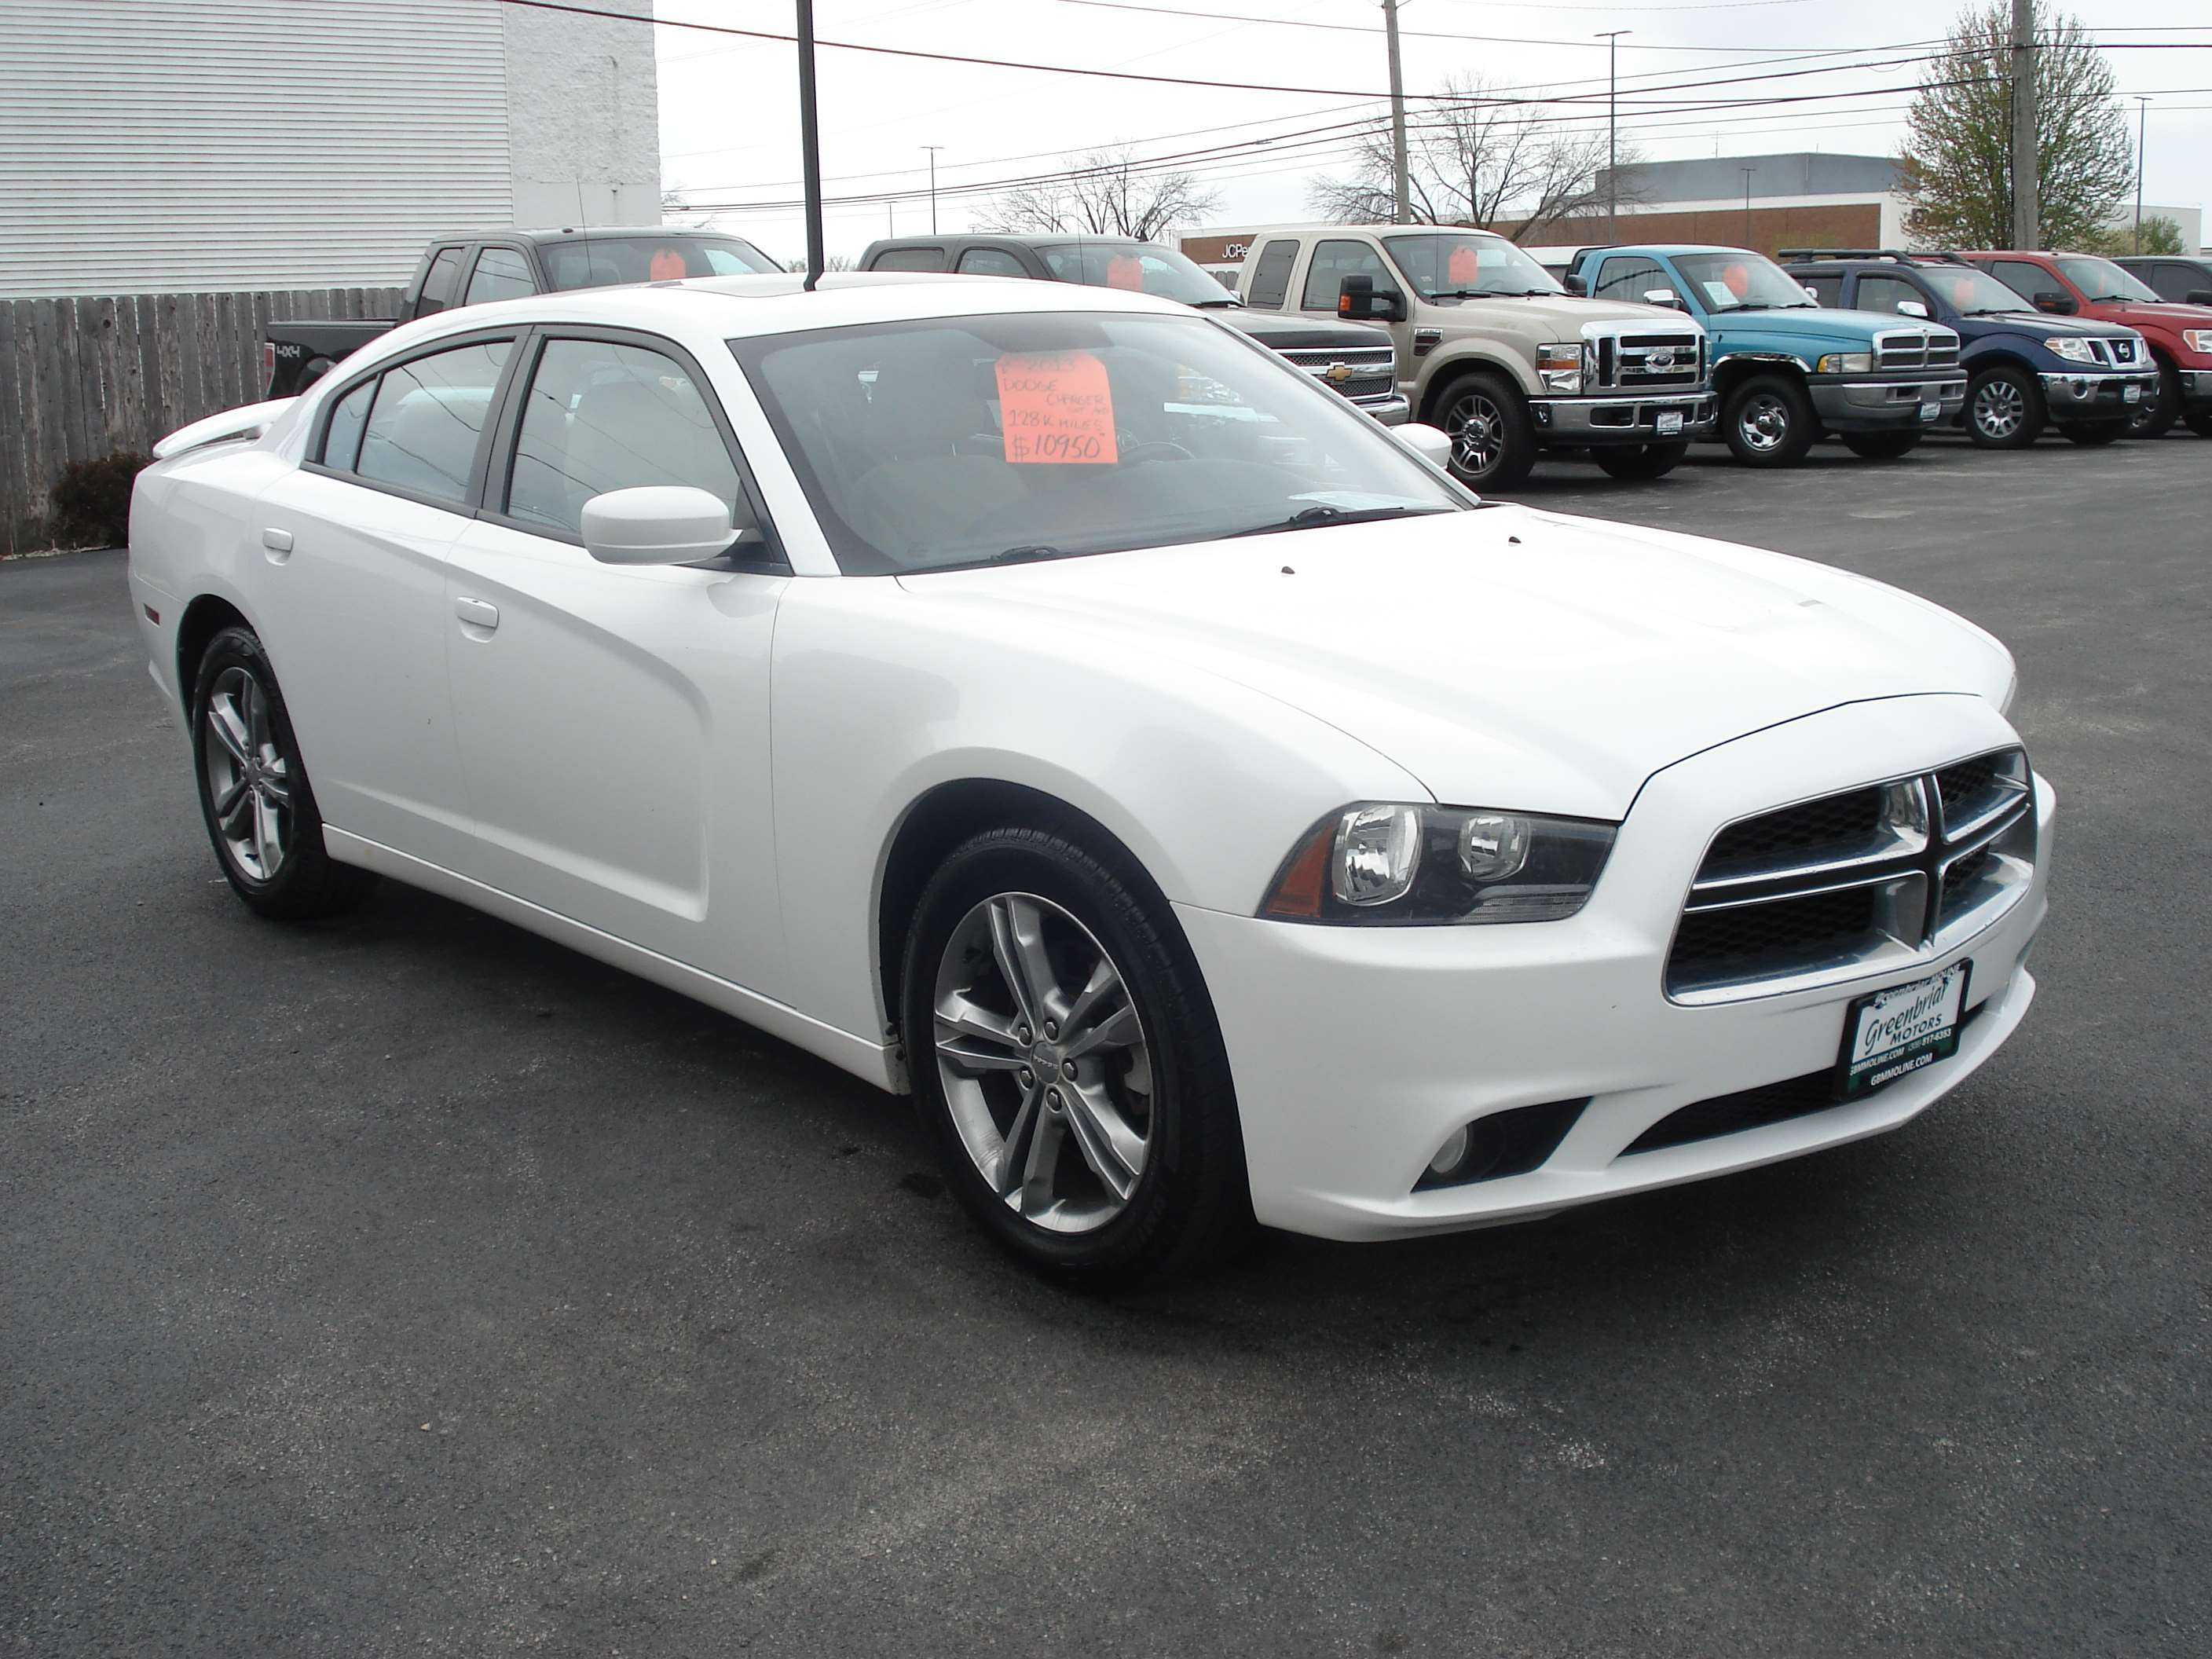 Dodge Charger Image 4